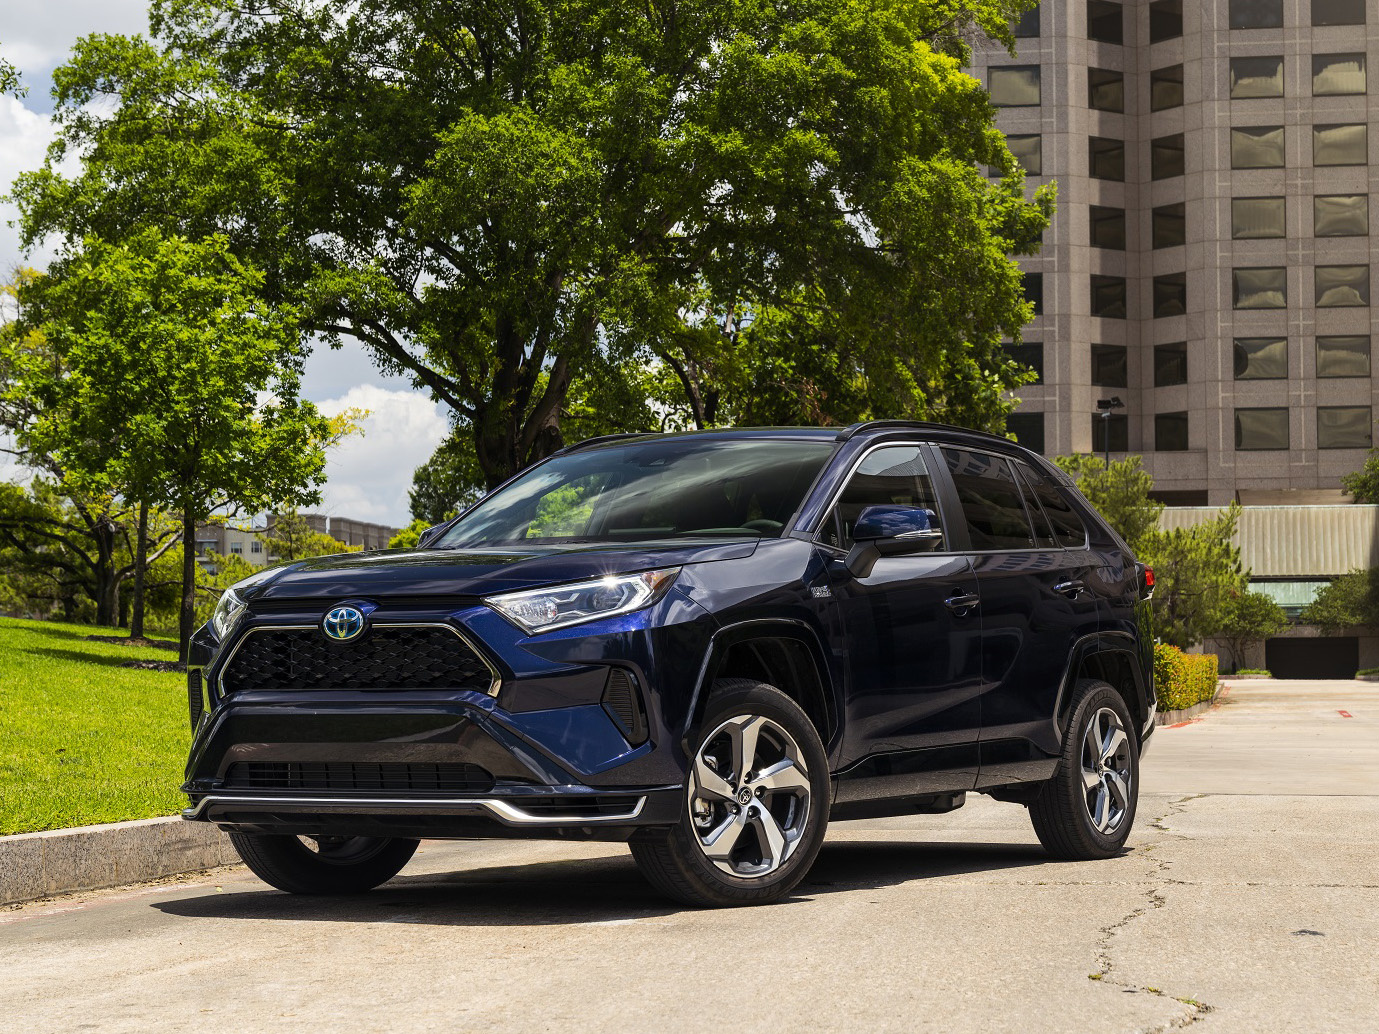 The 2021 Toyota RAV4 Prime is a big step ahead for the RAV4 brand.